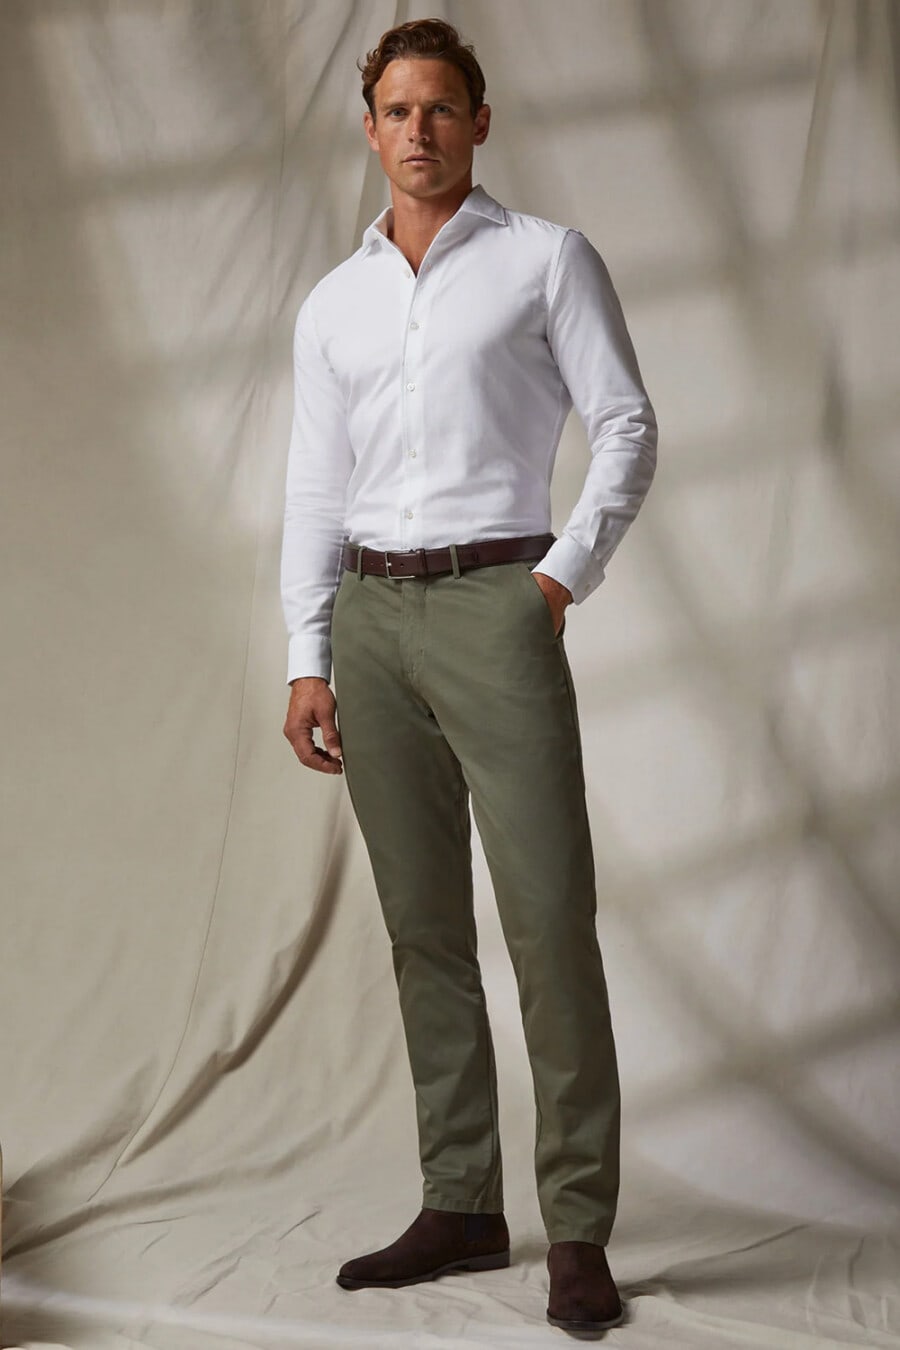 Men's green pants, white tucked in shirt, brown leather belt and brown suede Chelsea boots business casual outfit